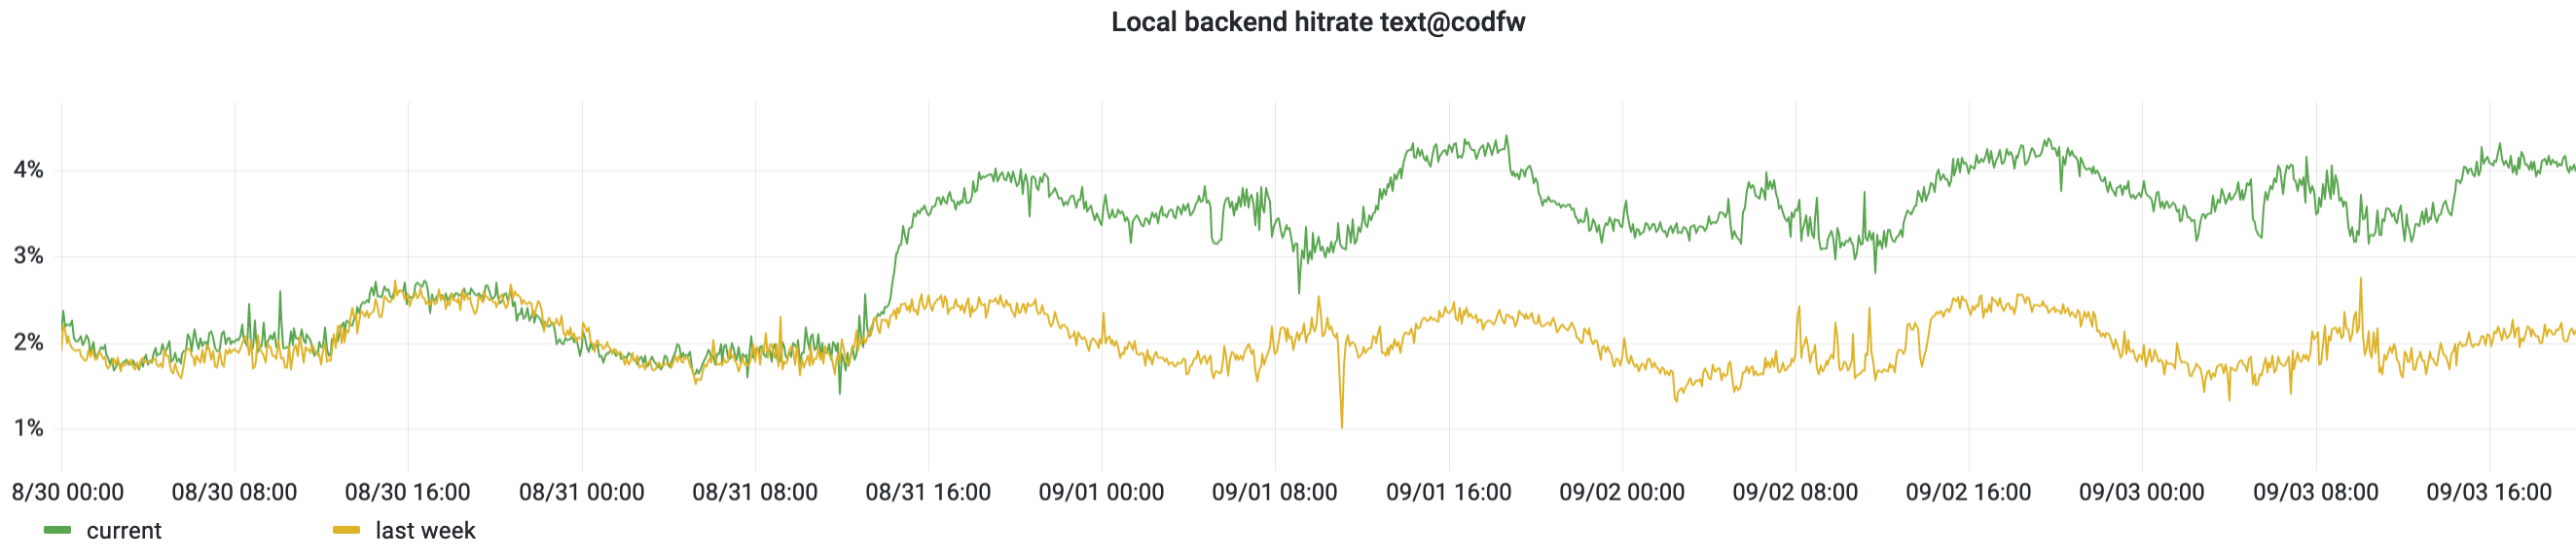 ats-backend_hitrate-codfw_text-2022-09.png (575×2 px, 169 KB)